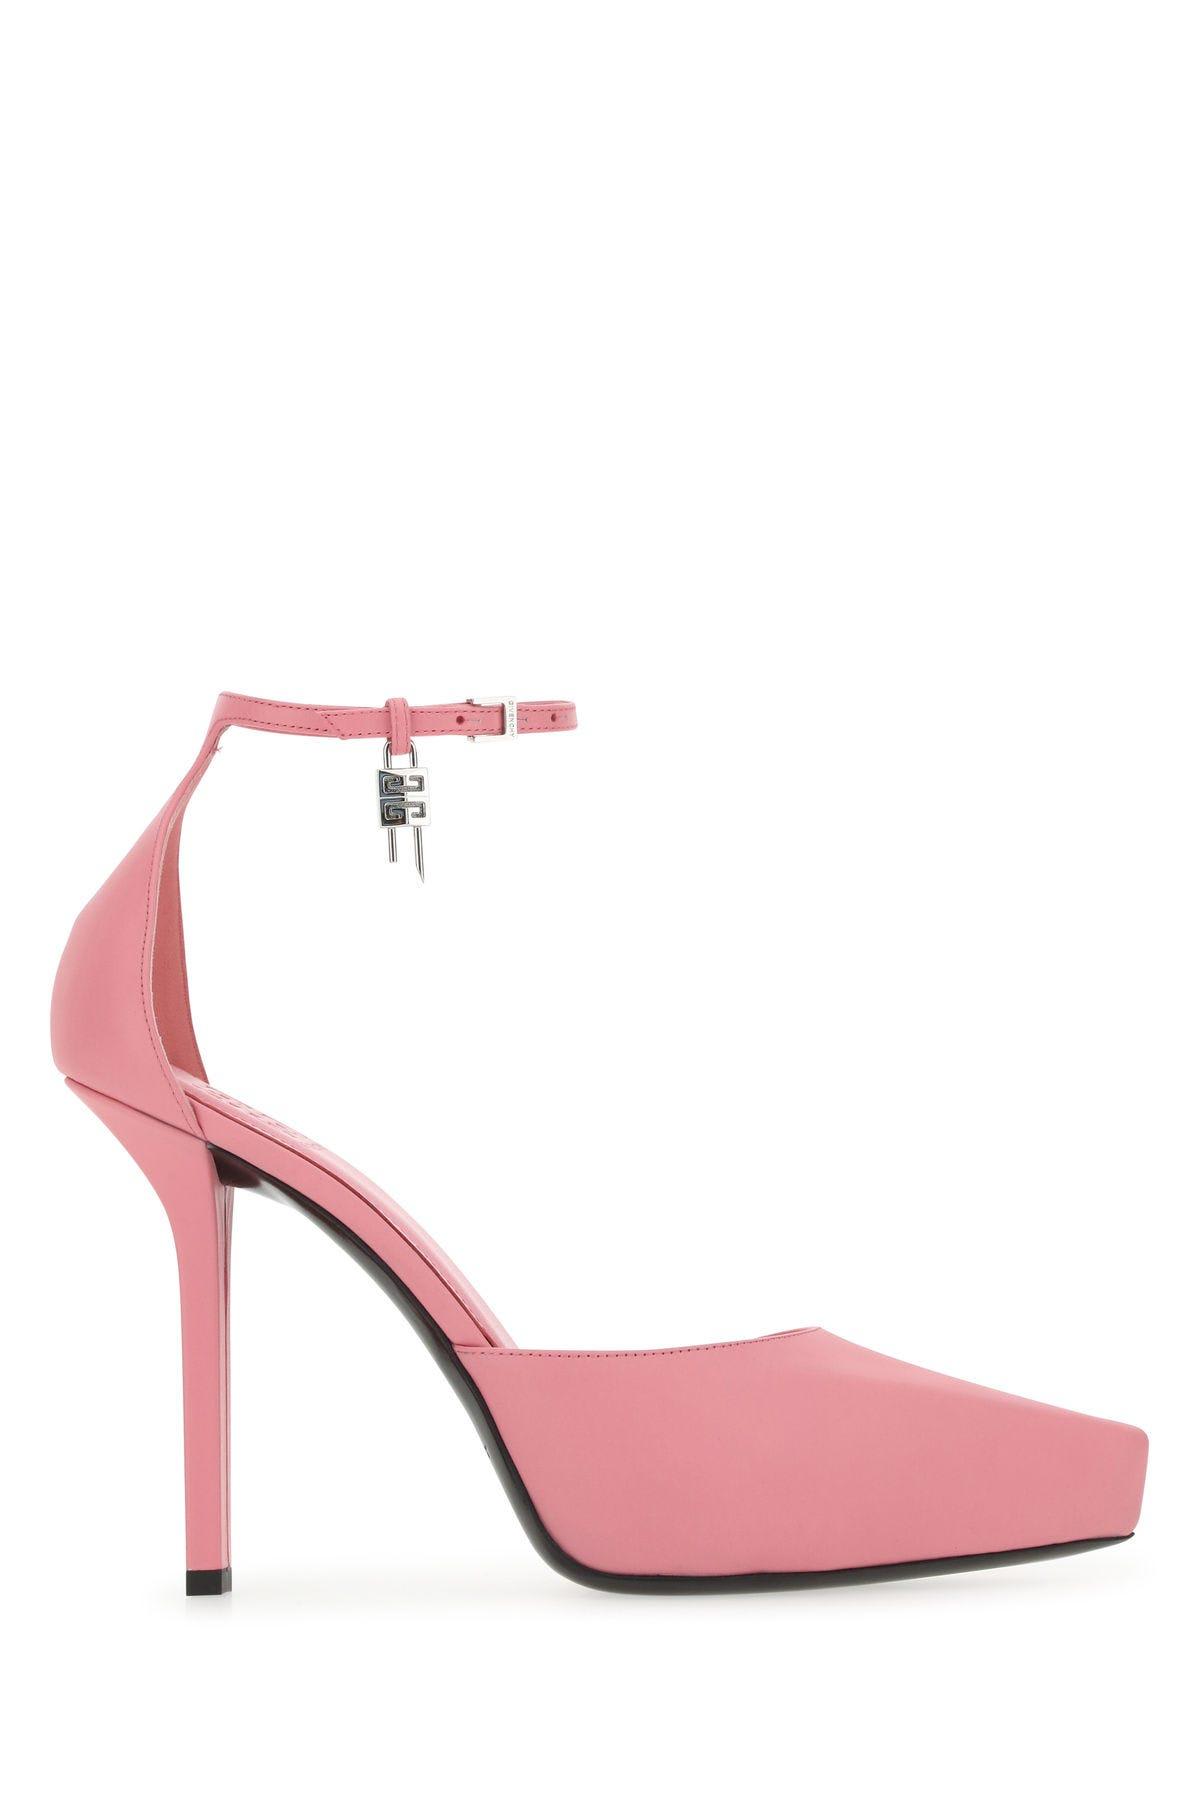 GIVENCHY PINK LEATHER G-LOCK PUMPS